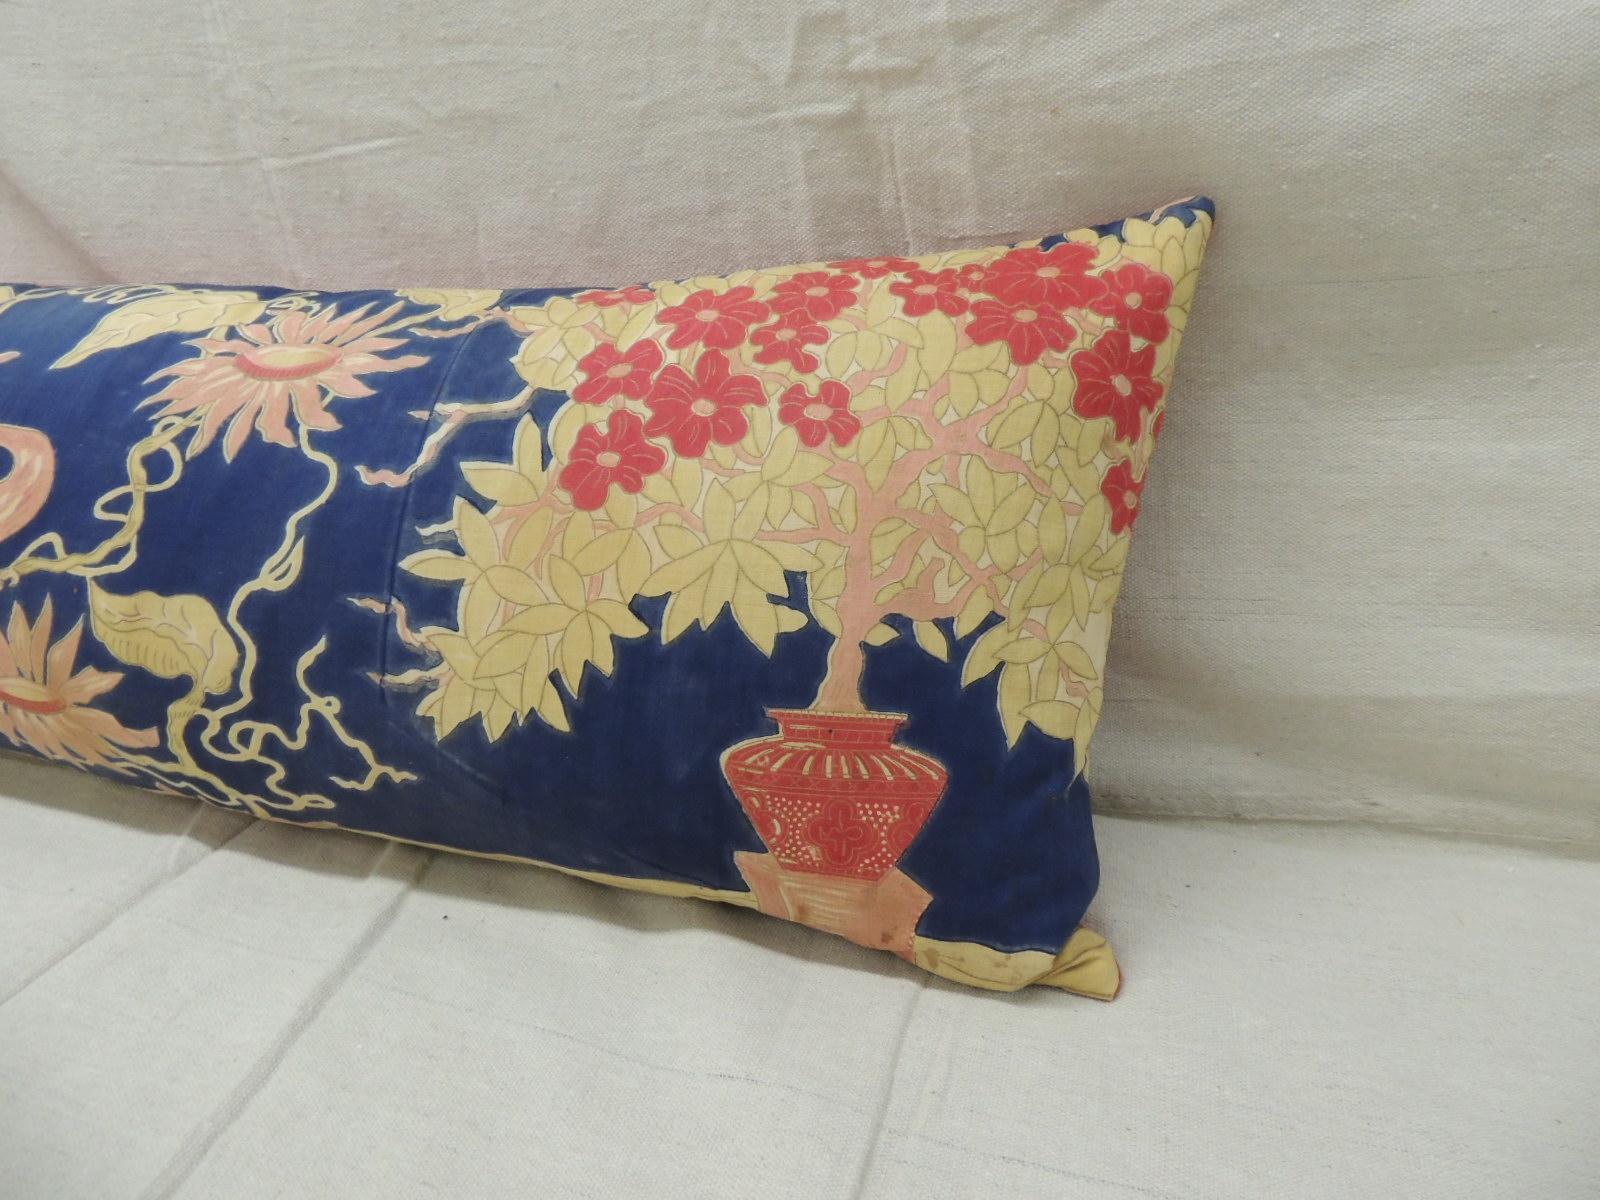 Antique yellow and blue Indian peacock long Bolster decorative pillow.
Depicting peacock and tree of life.
Pink texture linen backing.
Decorative pillow handcrafted and designed in the USA. 
Closure by stitch (no zipper closure) with custom-made